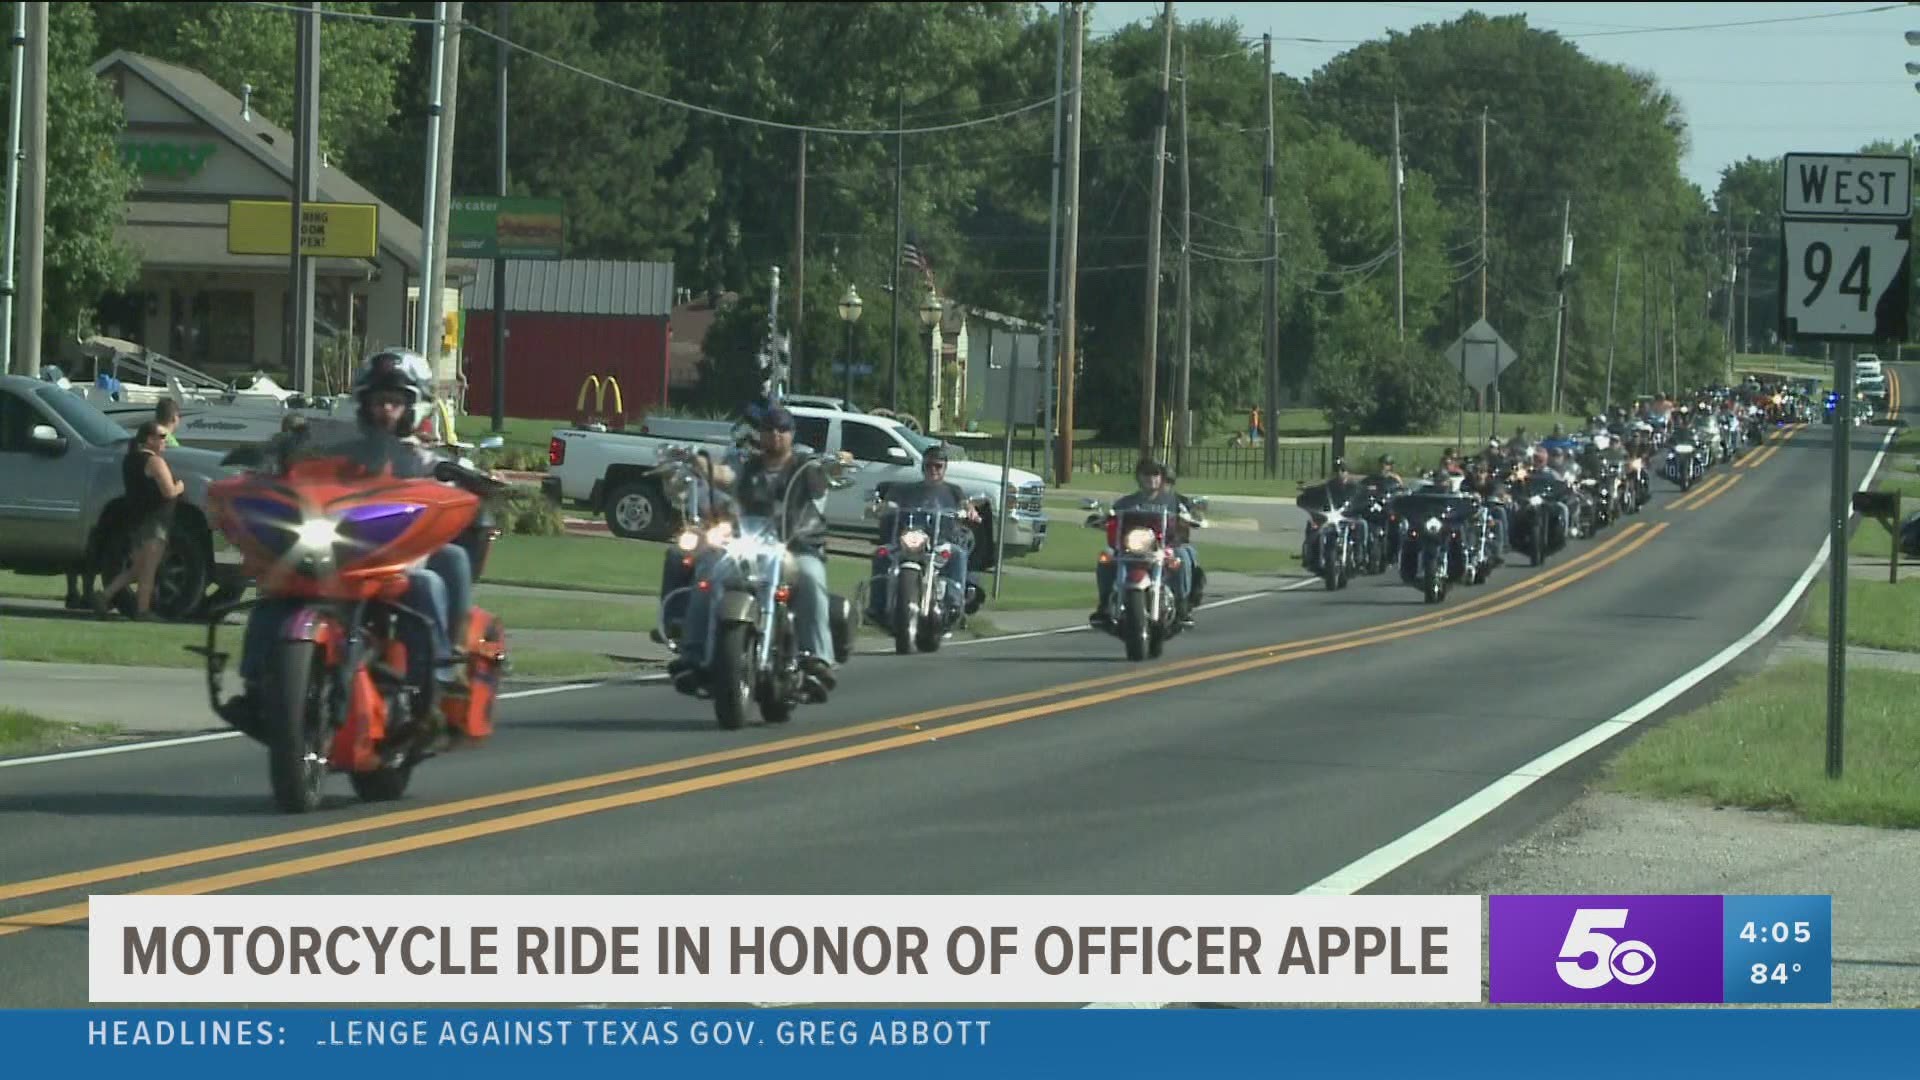 Today (July 5) was the first-ever Kevin Apple Memorial Motorcycle Parade was held in Pea Ridge with over 200 motorcycles in attendance.